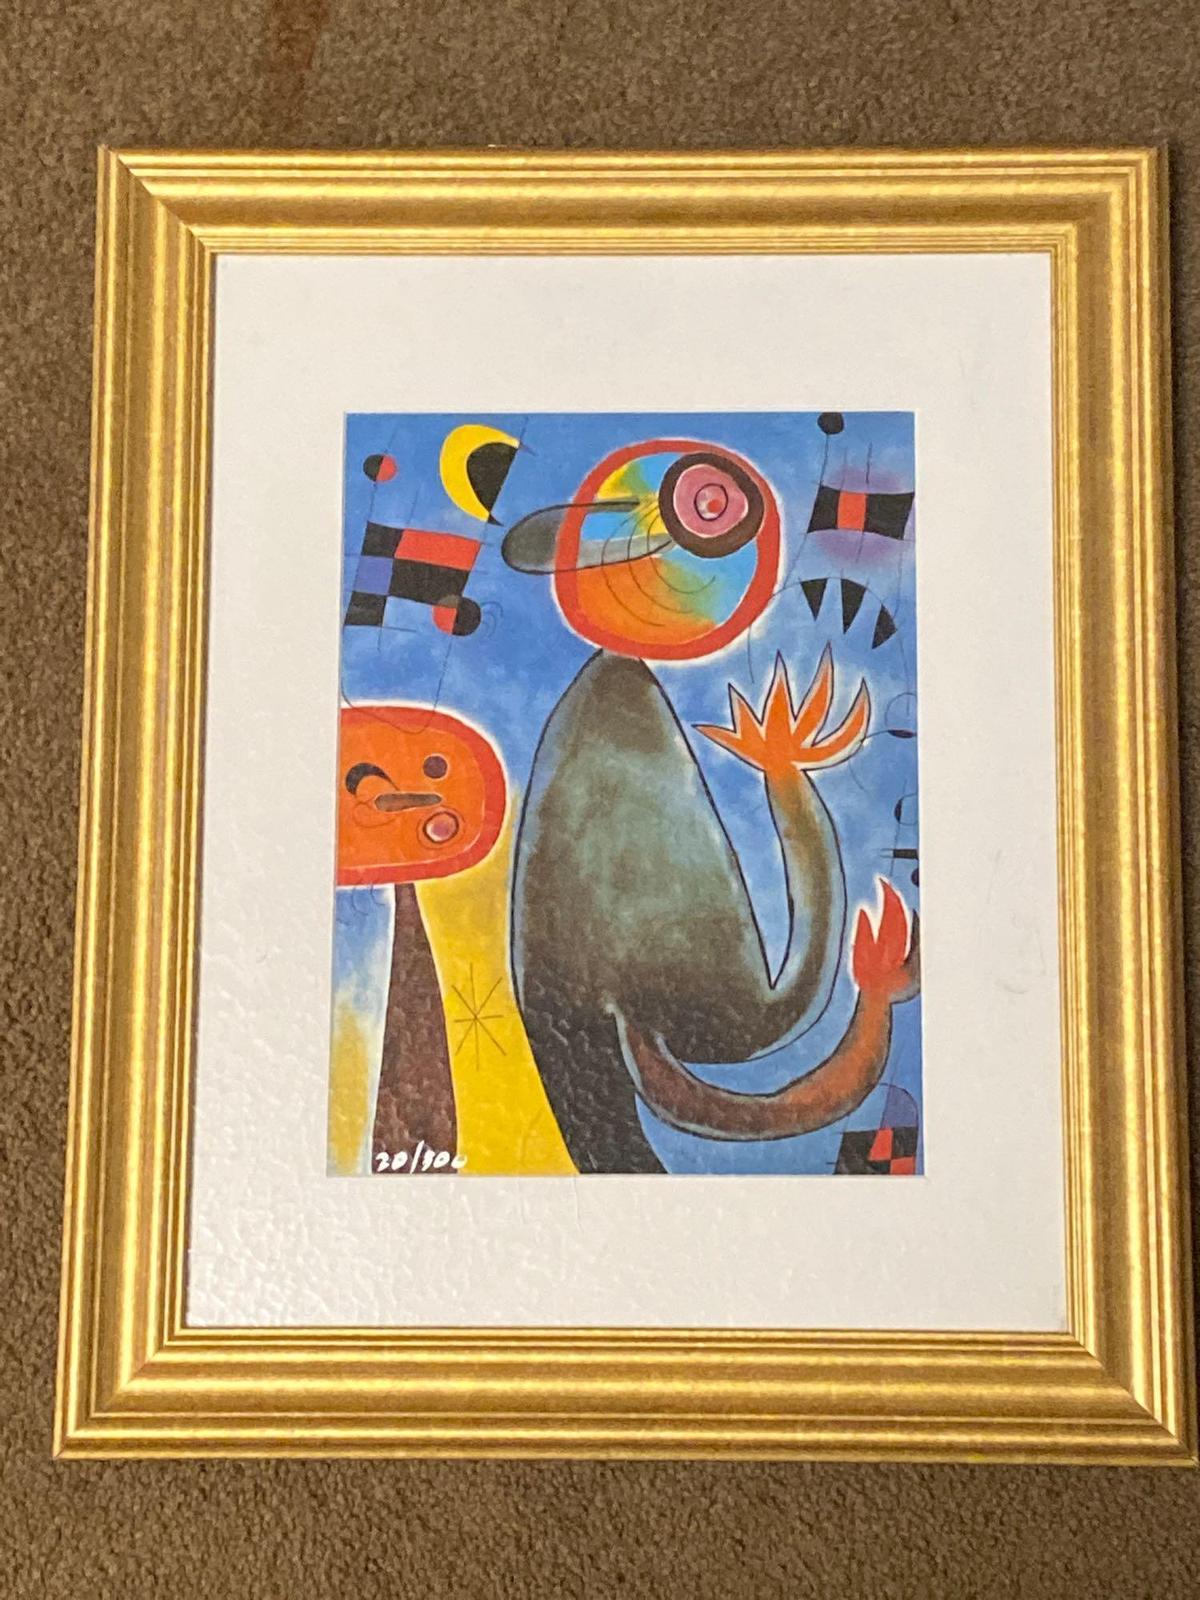 Joan Miro giclee on paper, "Ladders Cross the Blue Sky", 2009, Plate signed edition #20 off300, 20 x